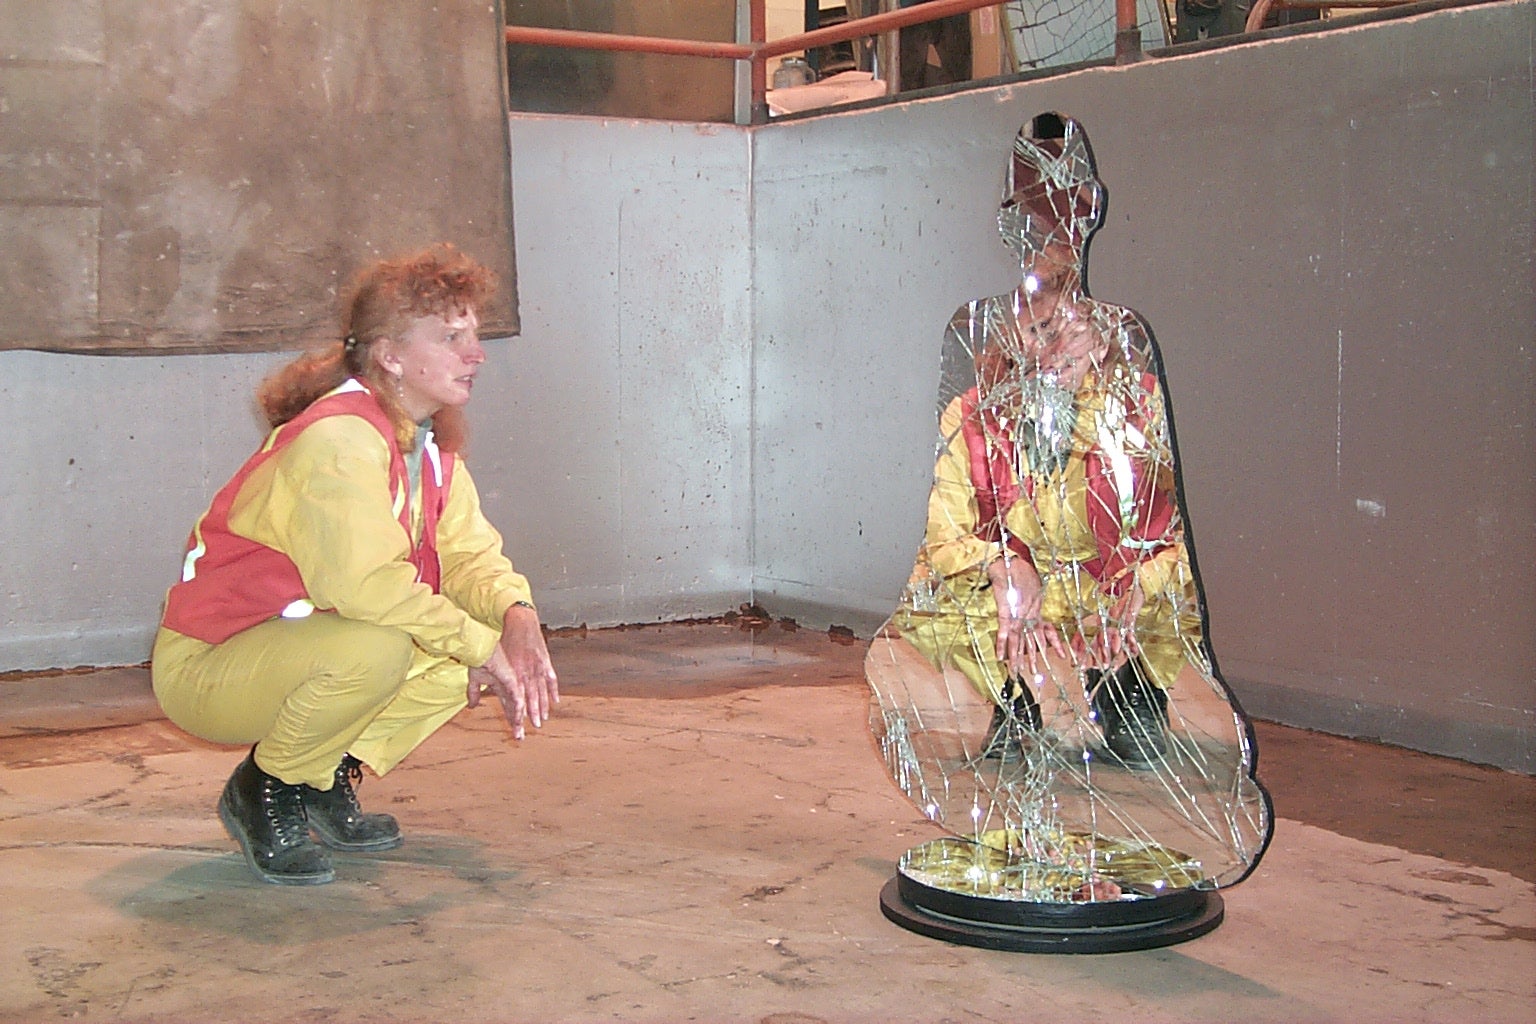 Reddy Lieb with The Meditator in Recology San Francisco studio  2000. Courtesy of the artist